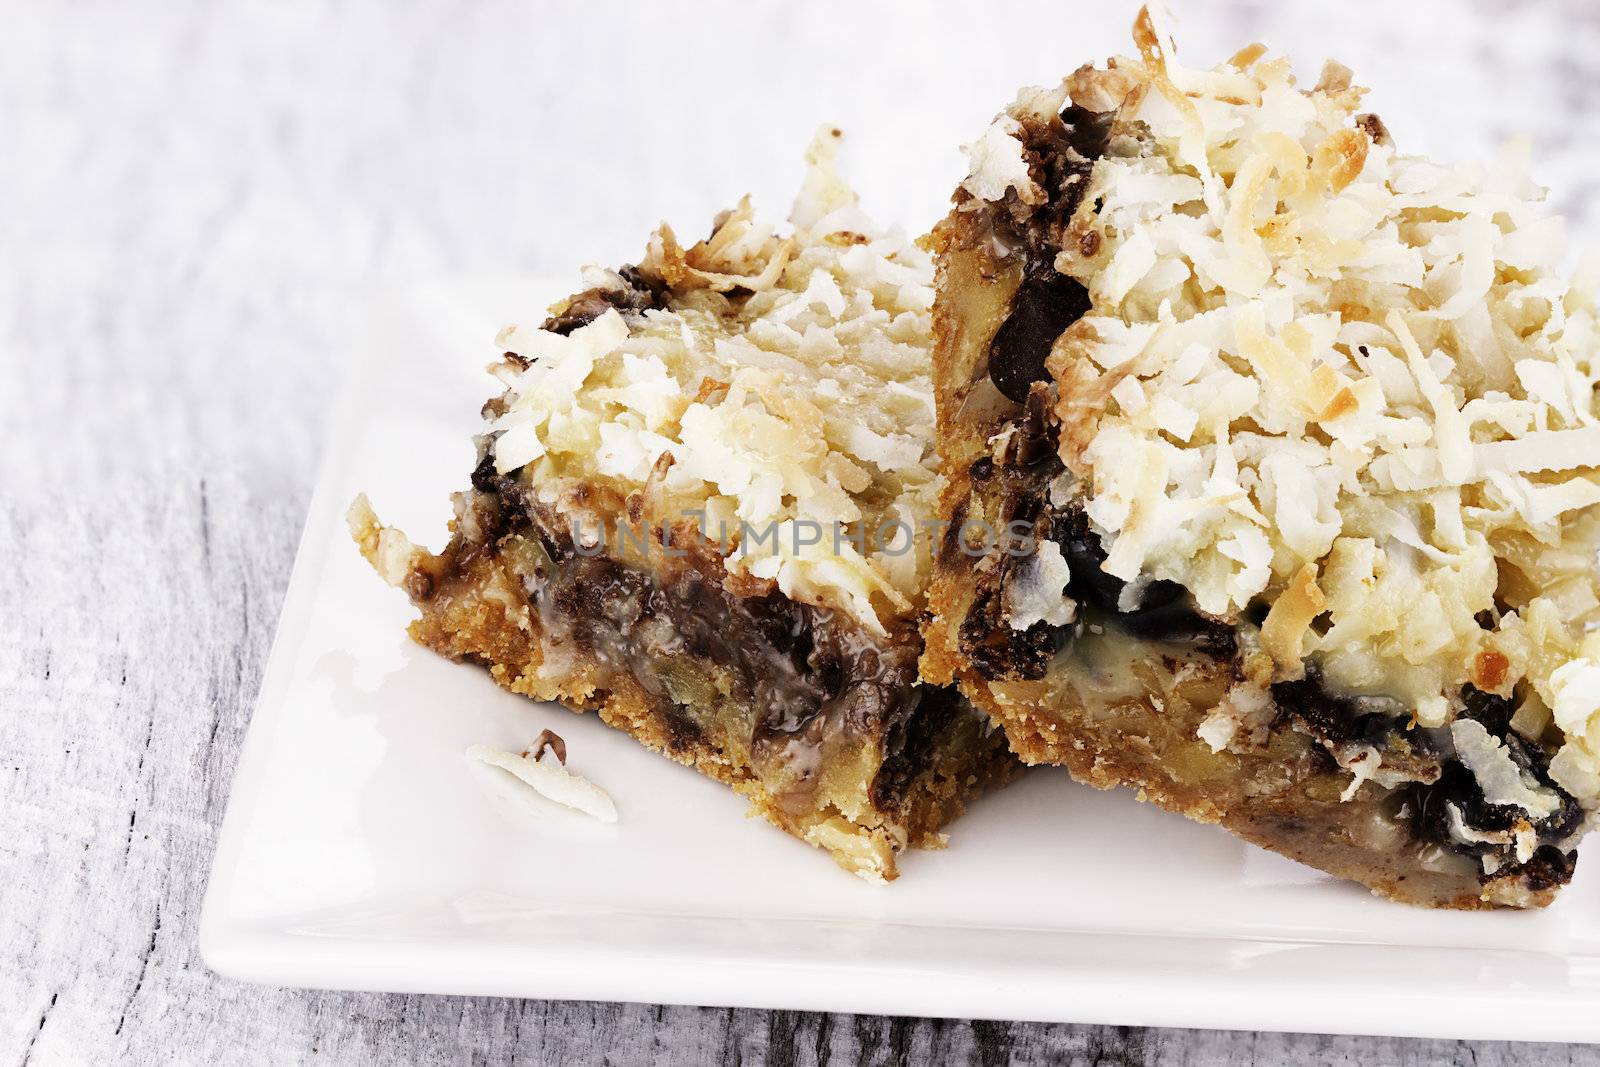 Two coconut chocolate chip bars over a rustic background.